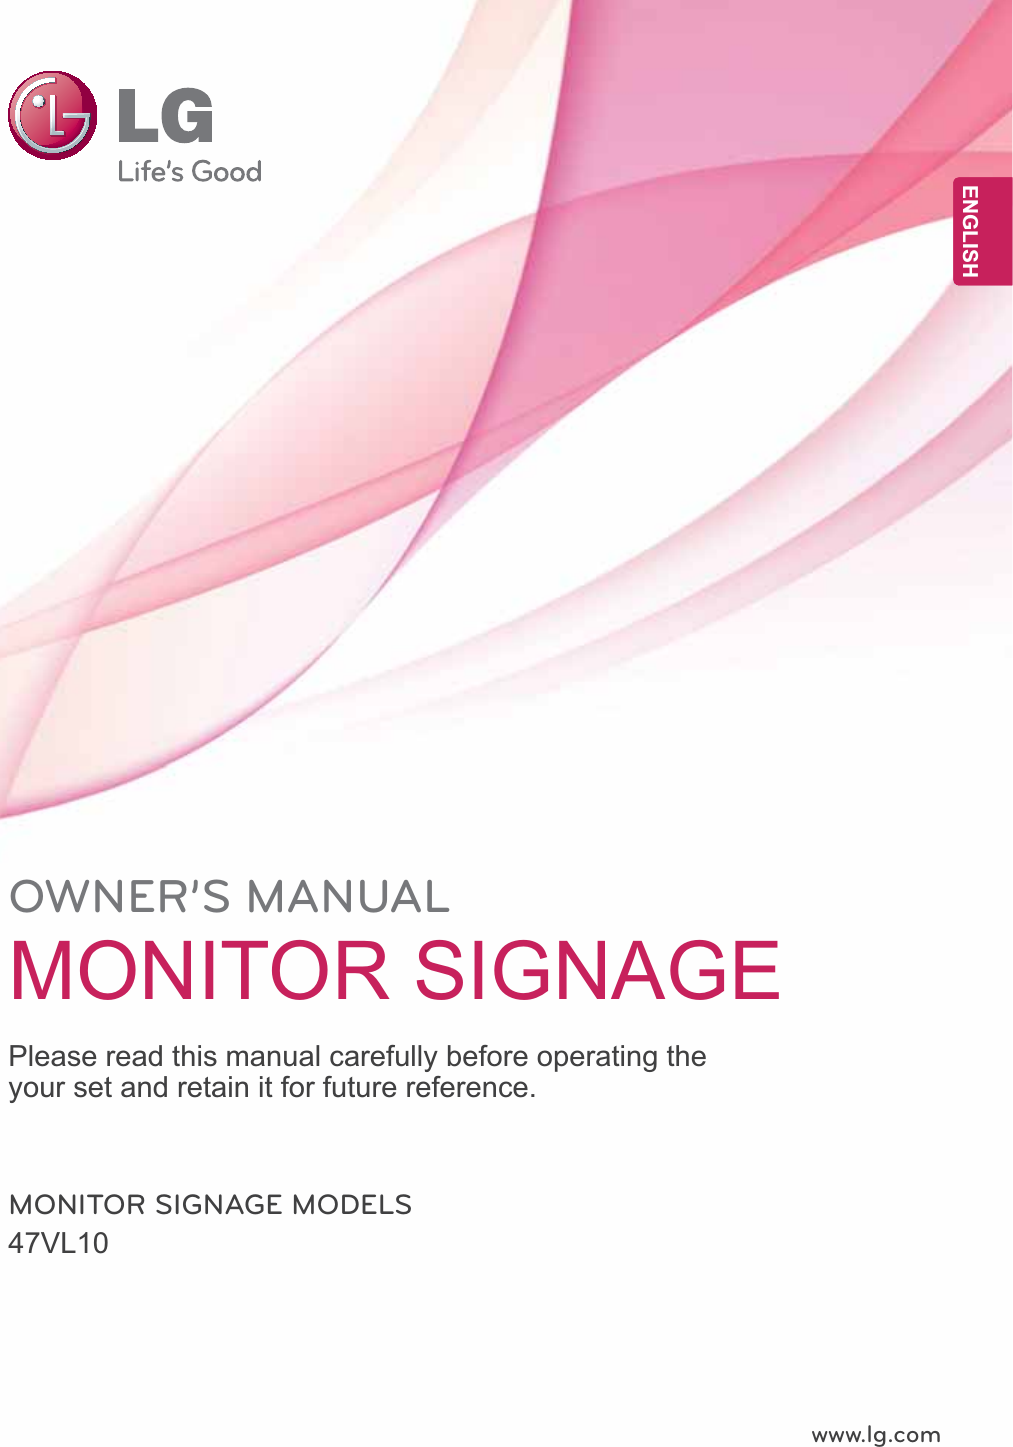 www.lg.comOWNER’S MANUALMONITOR SIGNAGE 47VL10Please read this manual carefully before operating the your set and retain it for future reference.MONITOR SIGNAGE MODELSENGENGLISH